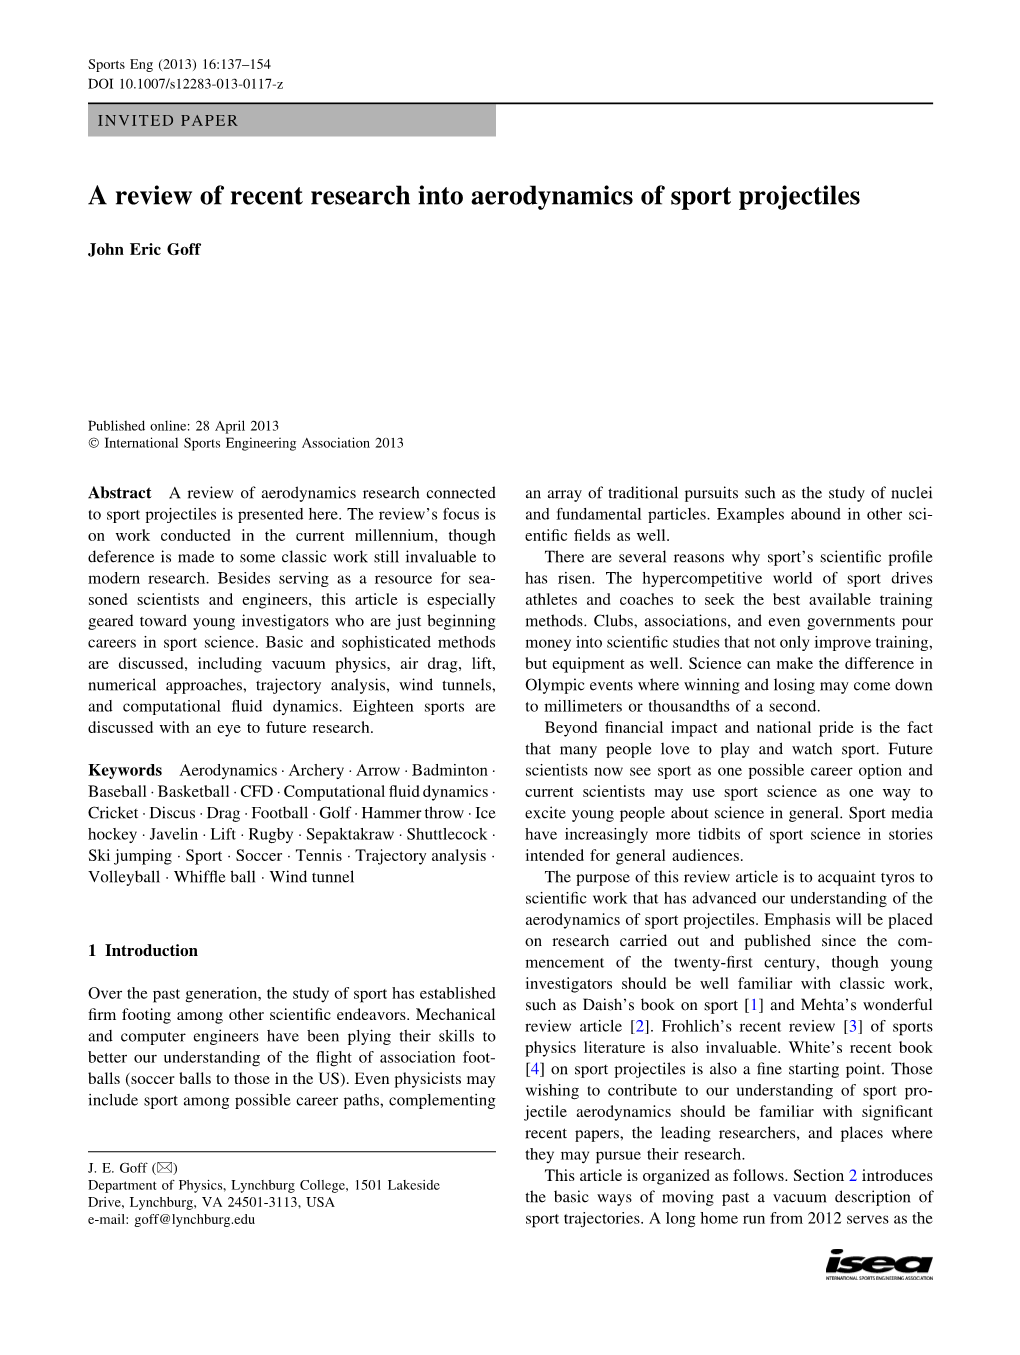 A Review of Recent Research Into Aerodynamics of Sport Projectiles